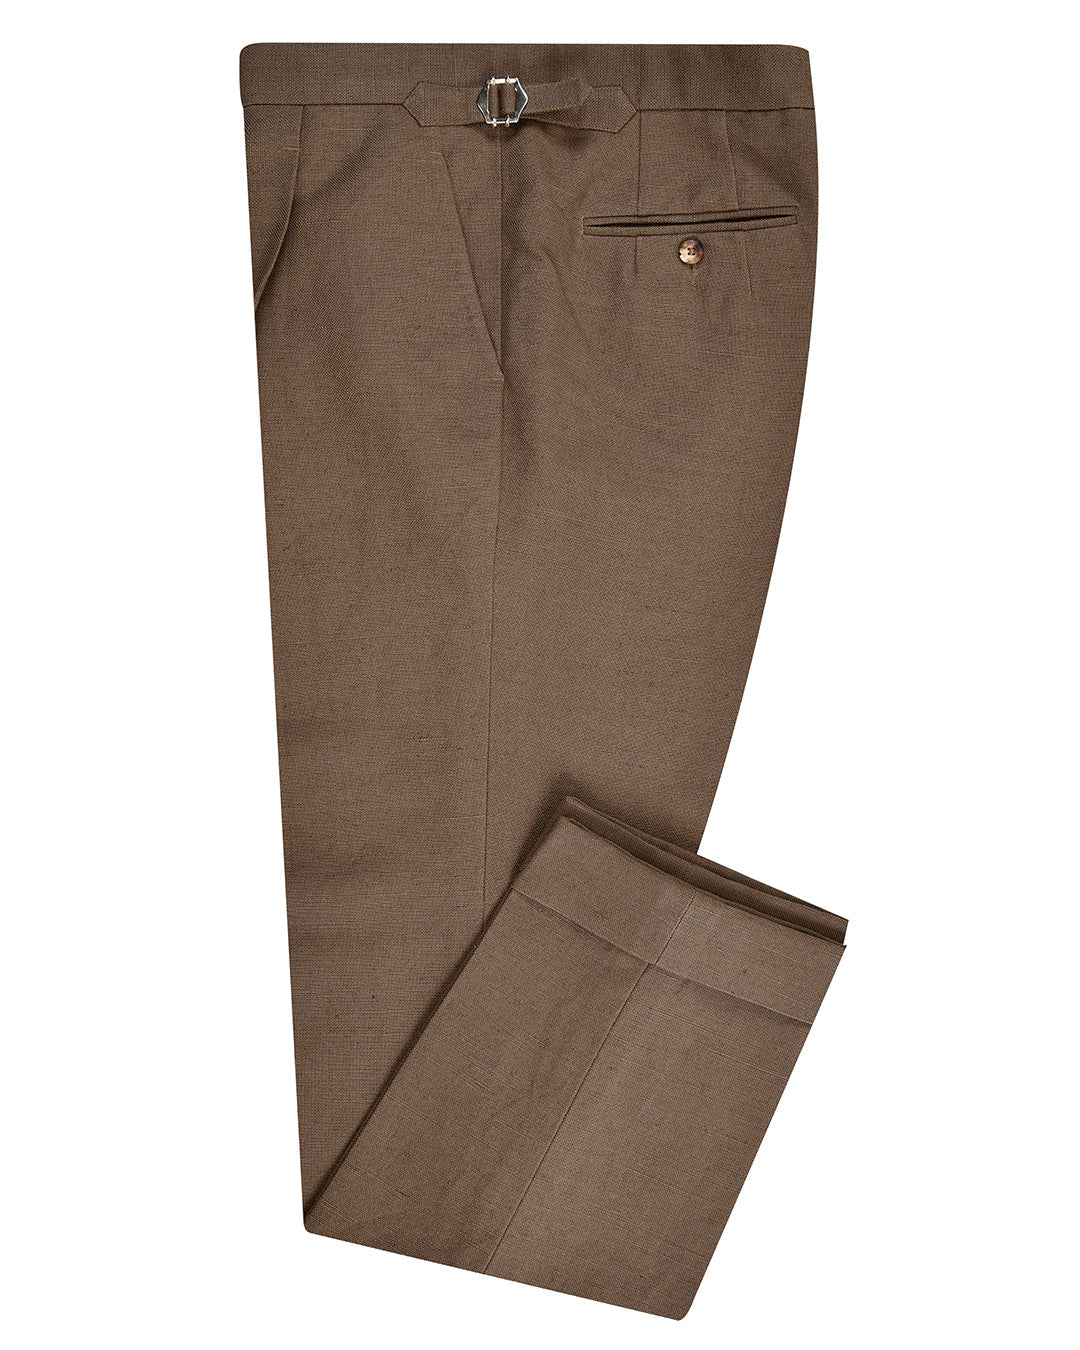 Side view of custom linen canvas pants for men by Luxire in brown